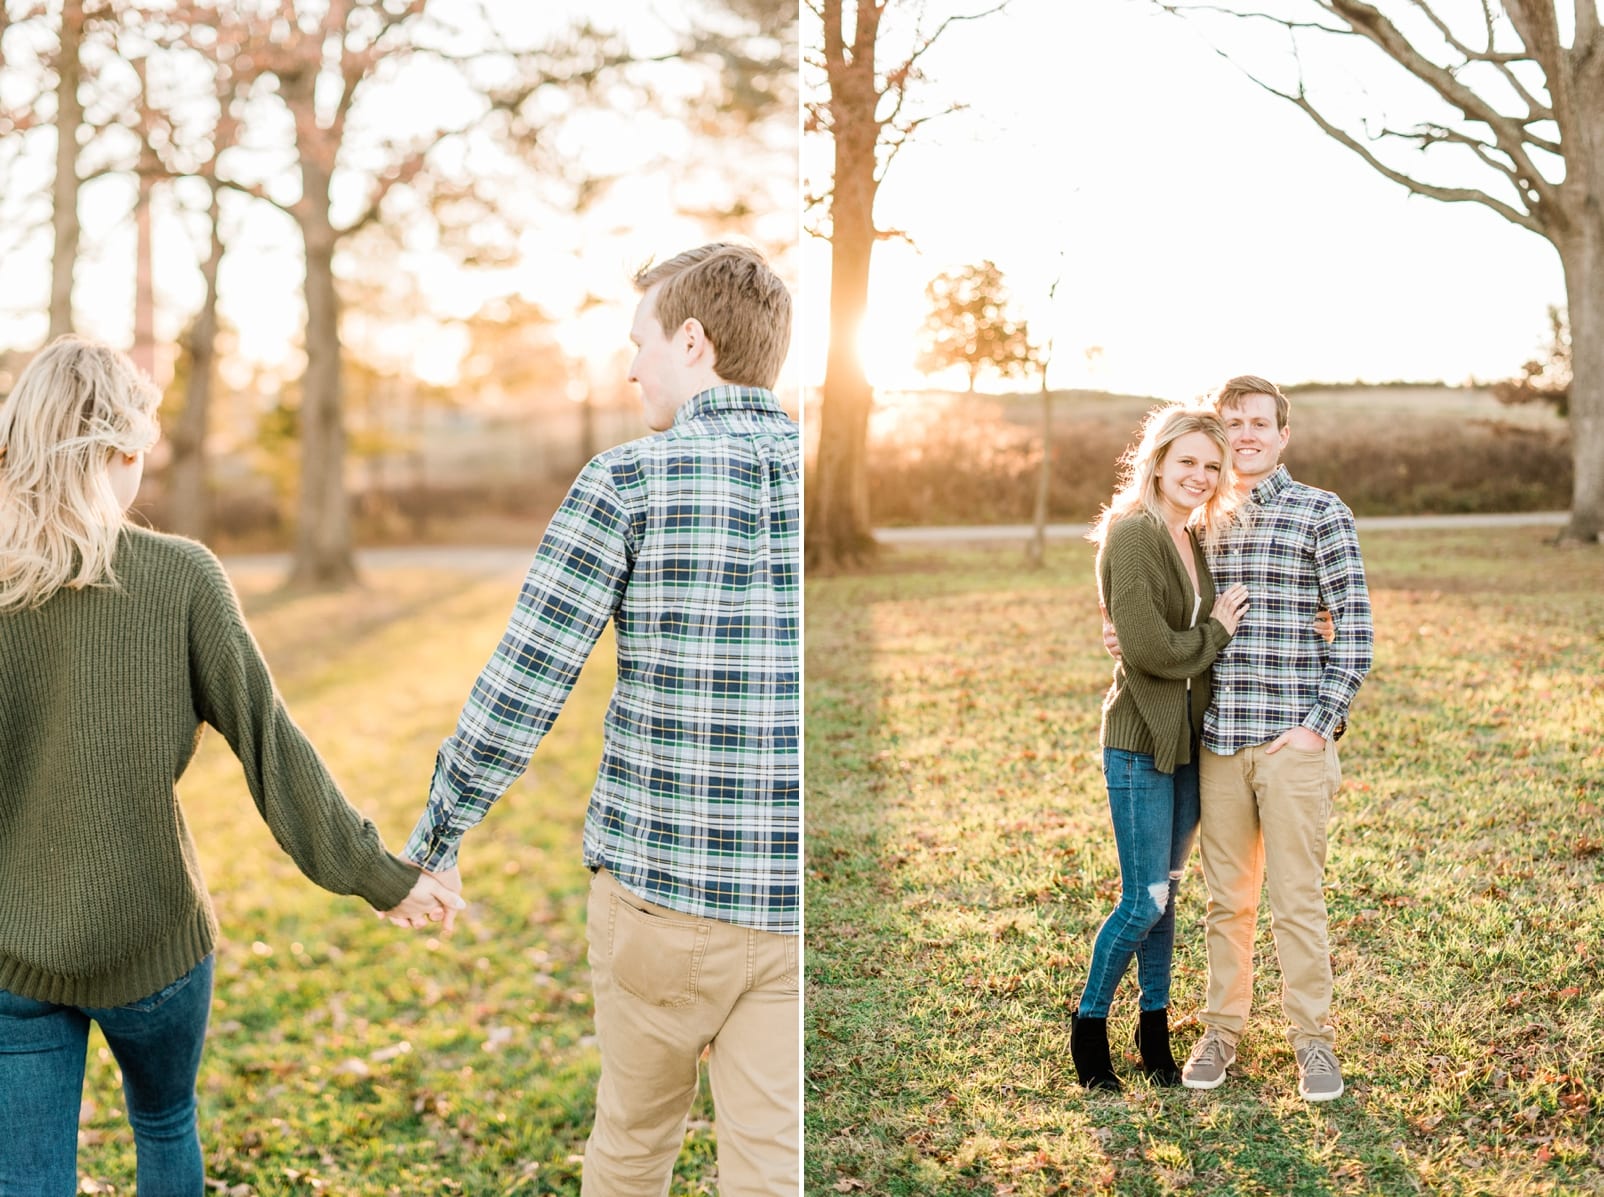 Winter photo session with the couple snuggled in together in the grass in front of a lake photo